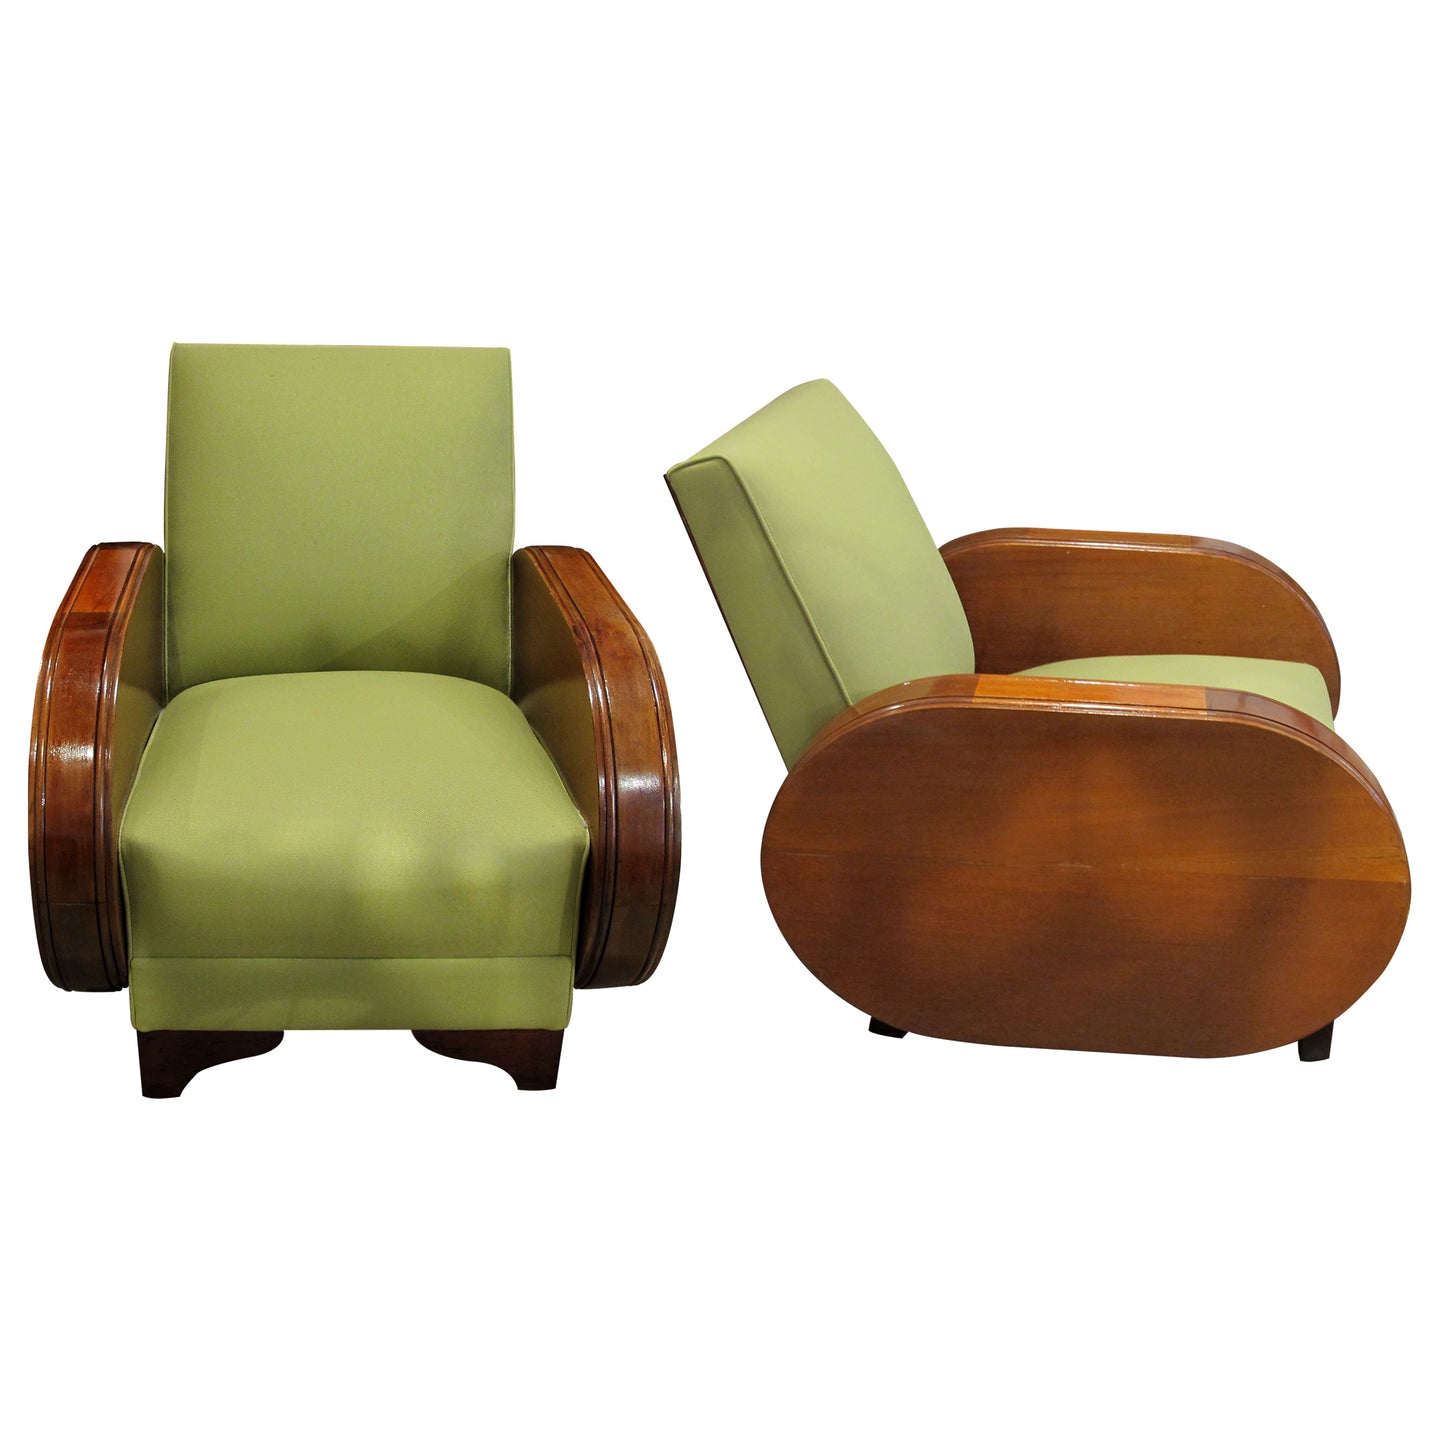 1930s northern European art deco pair of armchairs upholstered in a green fabric